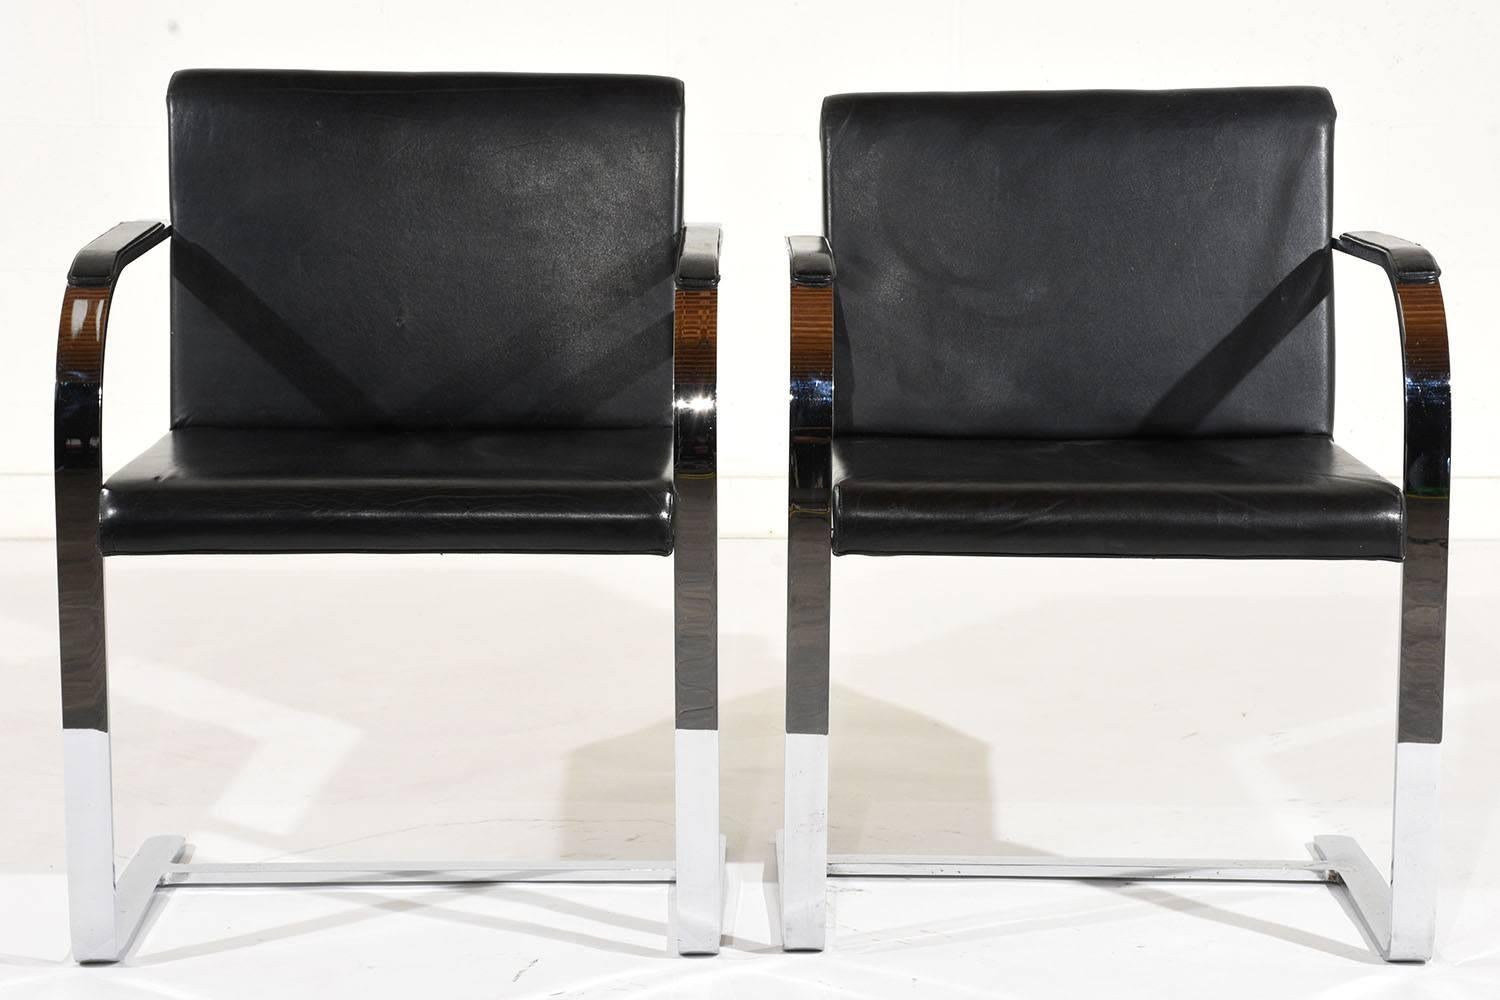 This pair of 1960s Mid-Century Modern flat bar Brno chairs by Mies Van Der Rohe feature a sleek chrome frame and leather upholstery. The floating frame is sturdy and supported by a stretched bar at the bottom. The seat and armrests feature the